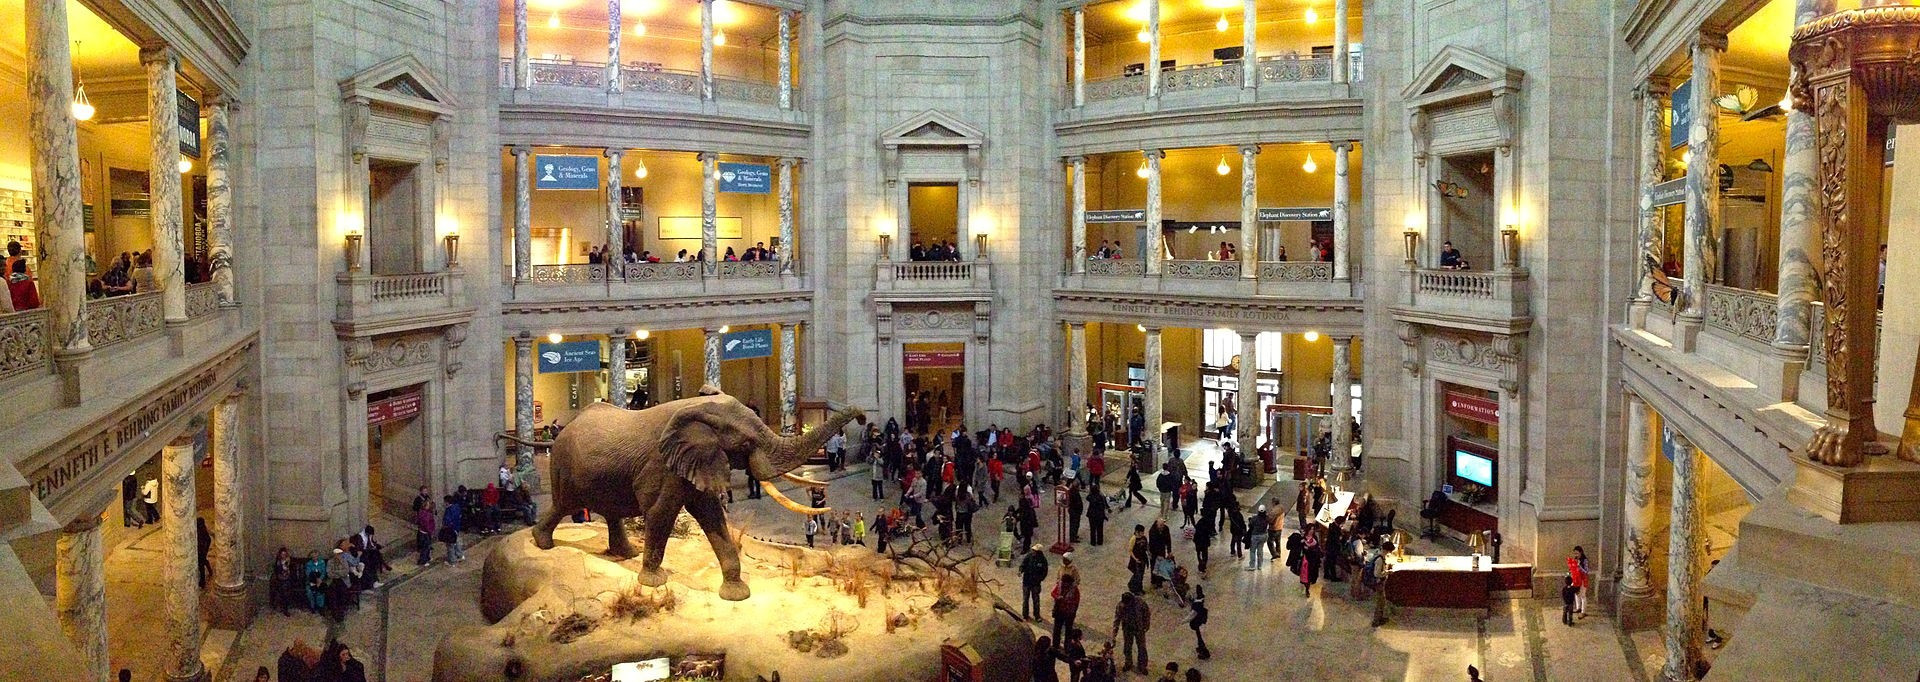 By Blake Patterson - Flickr: Natural Museum of Natural History in DC, CC BY 2.0, https://commons.wikimedia.org/w/index.php?curid=24910362